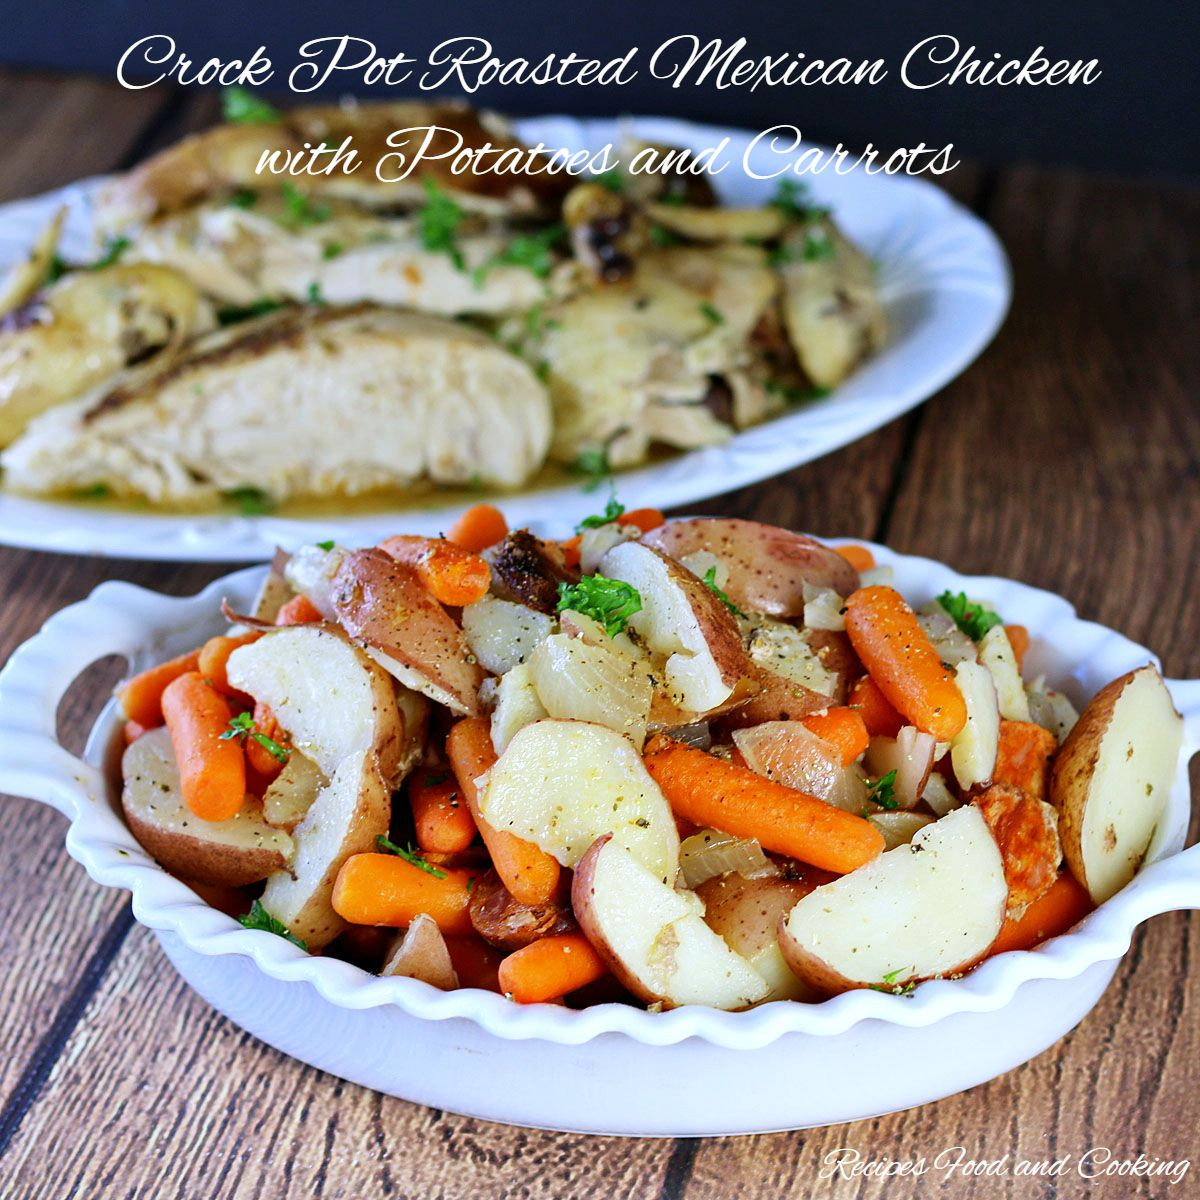 Crockpot Roasted Potatoes
 Crock Pot Roasted Mexican Chicken with Potatoes and